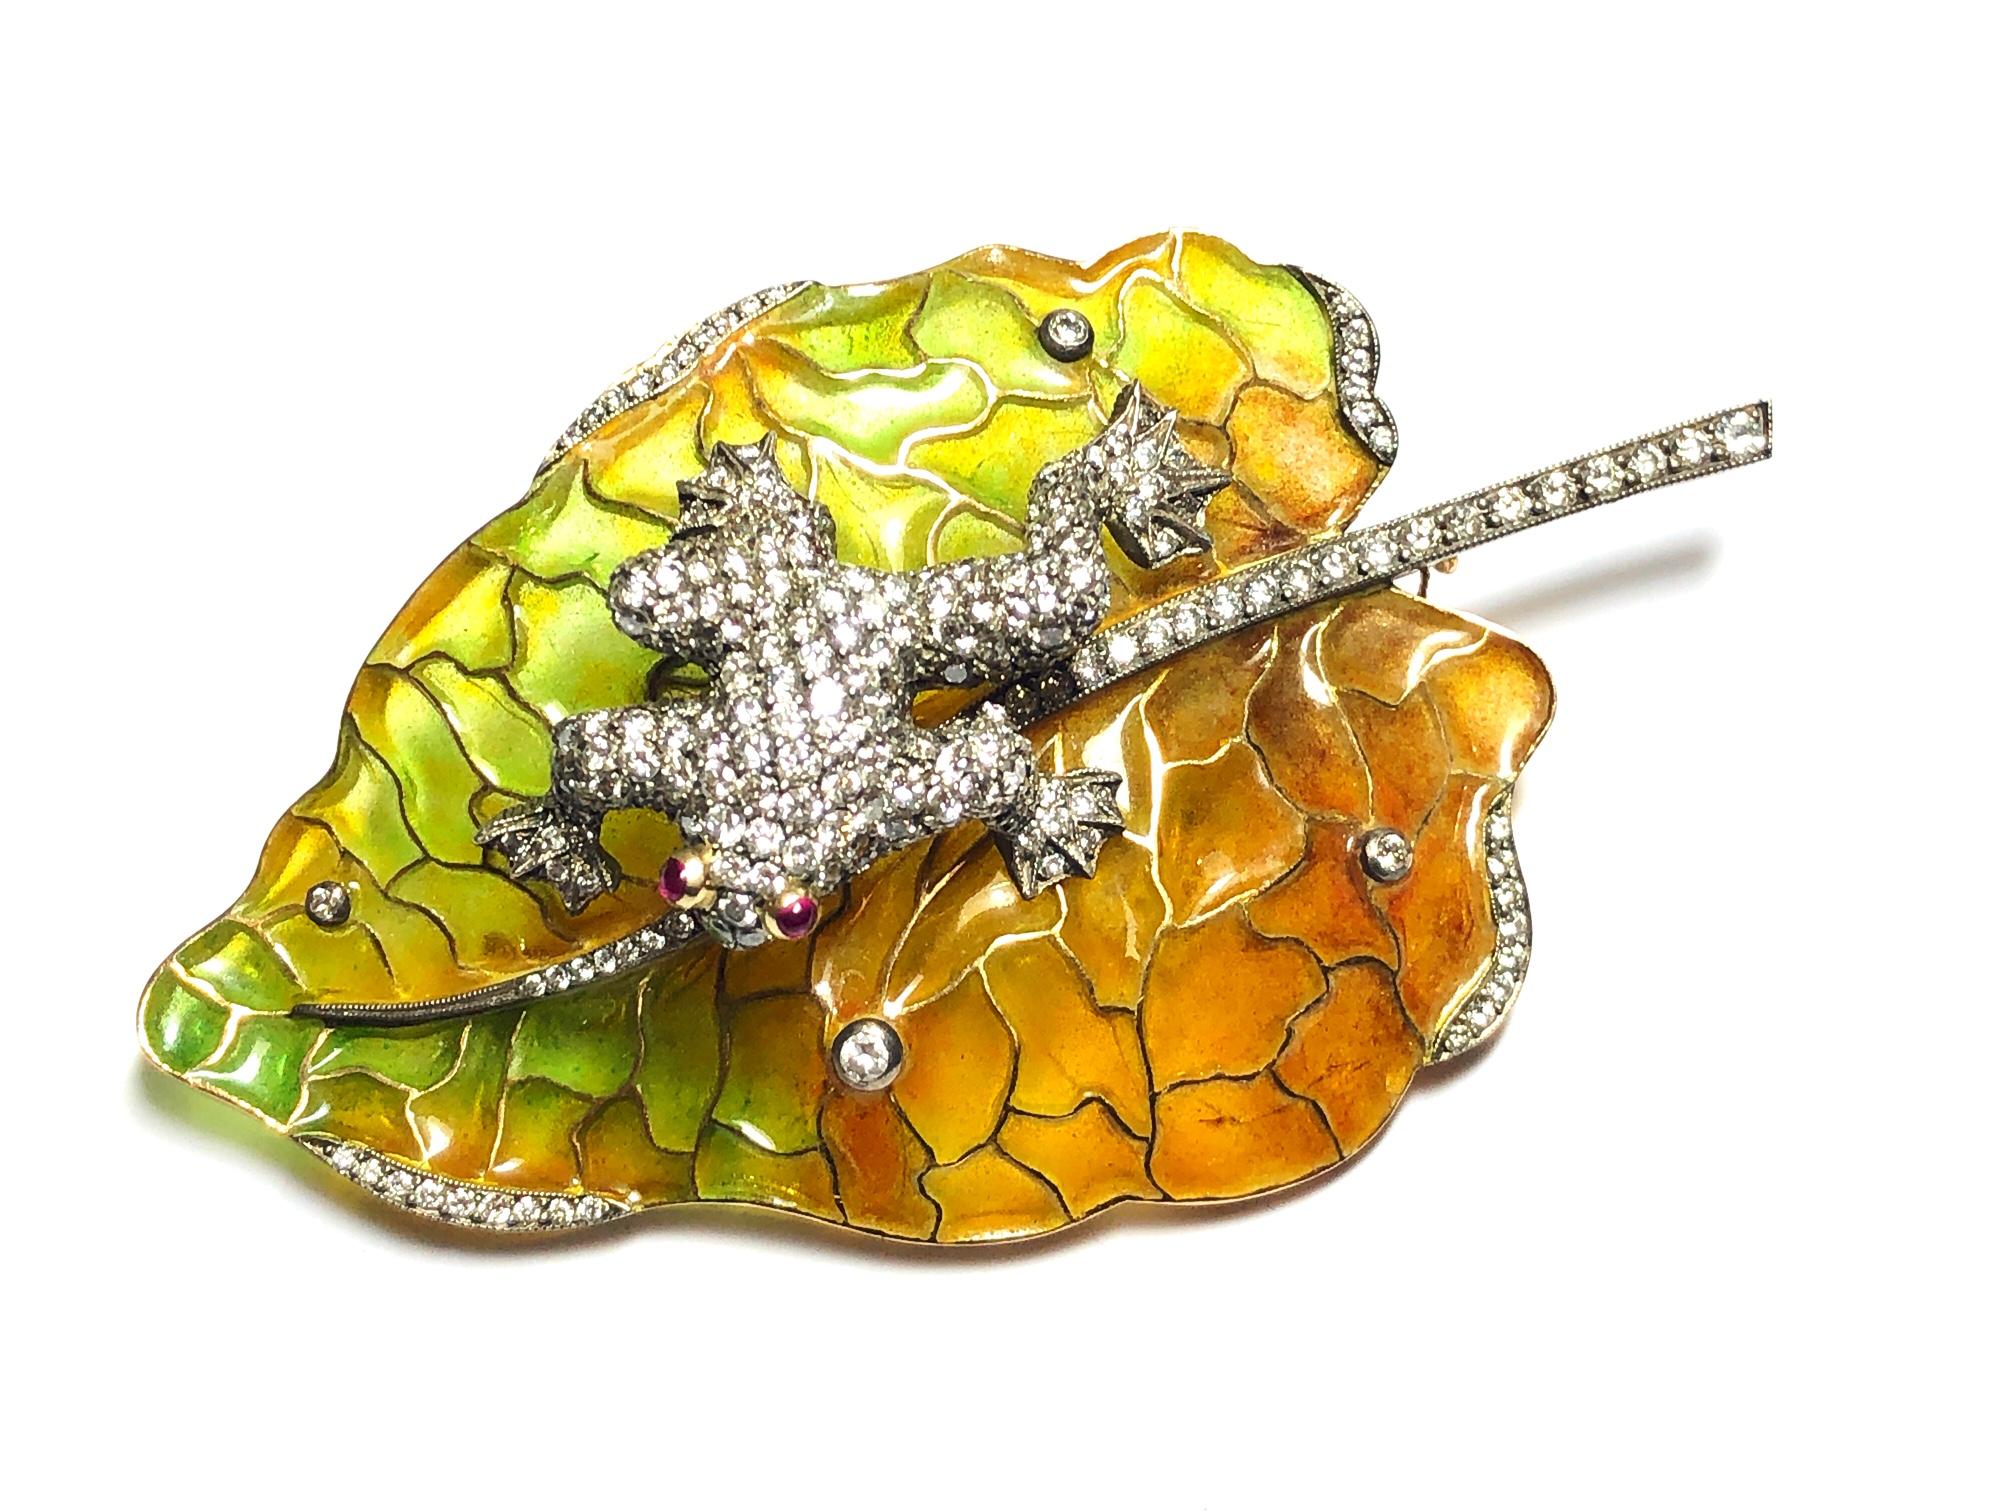 A frog on a leaf brooch designed by MOIRA, with a pavé diamond set frog, with cabochon cut ruby eyes, sitting on a green and ochre plique à jour enamel leaf, set with round brilliant-cut diamonds, mounted in gold, with silver settings. Signed Moira,